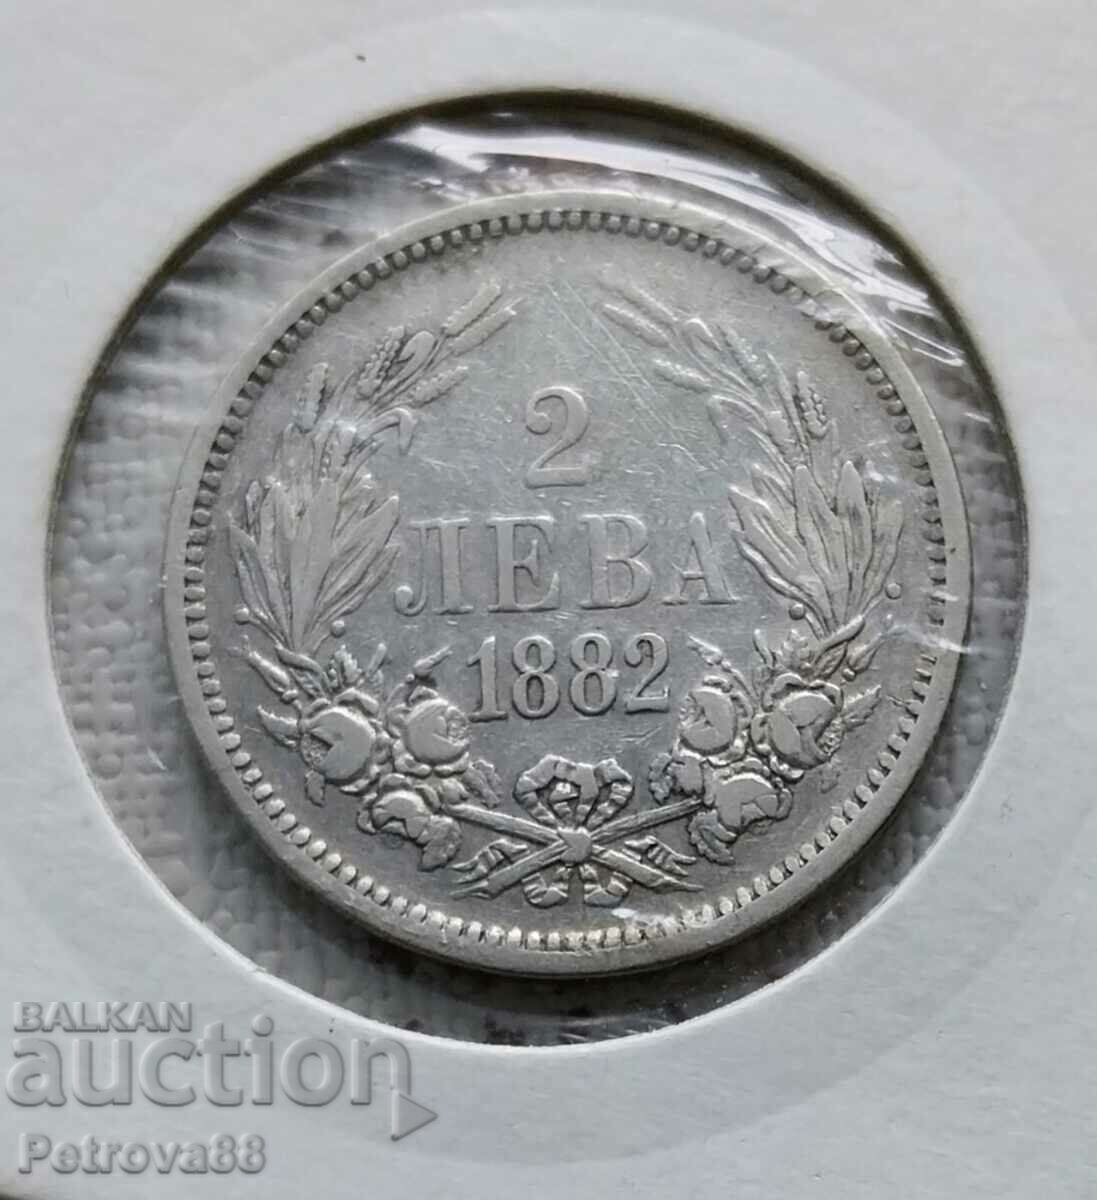 2 BGN from 1882